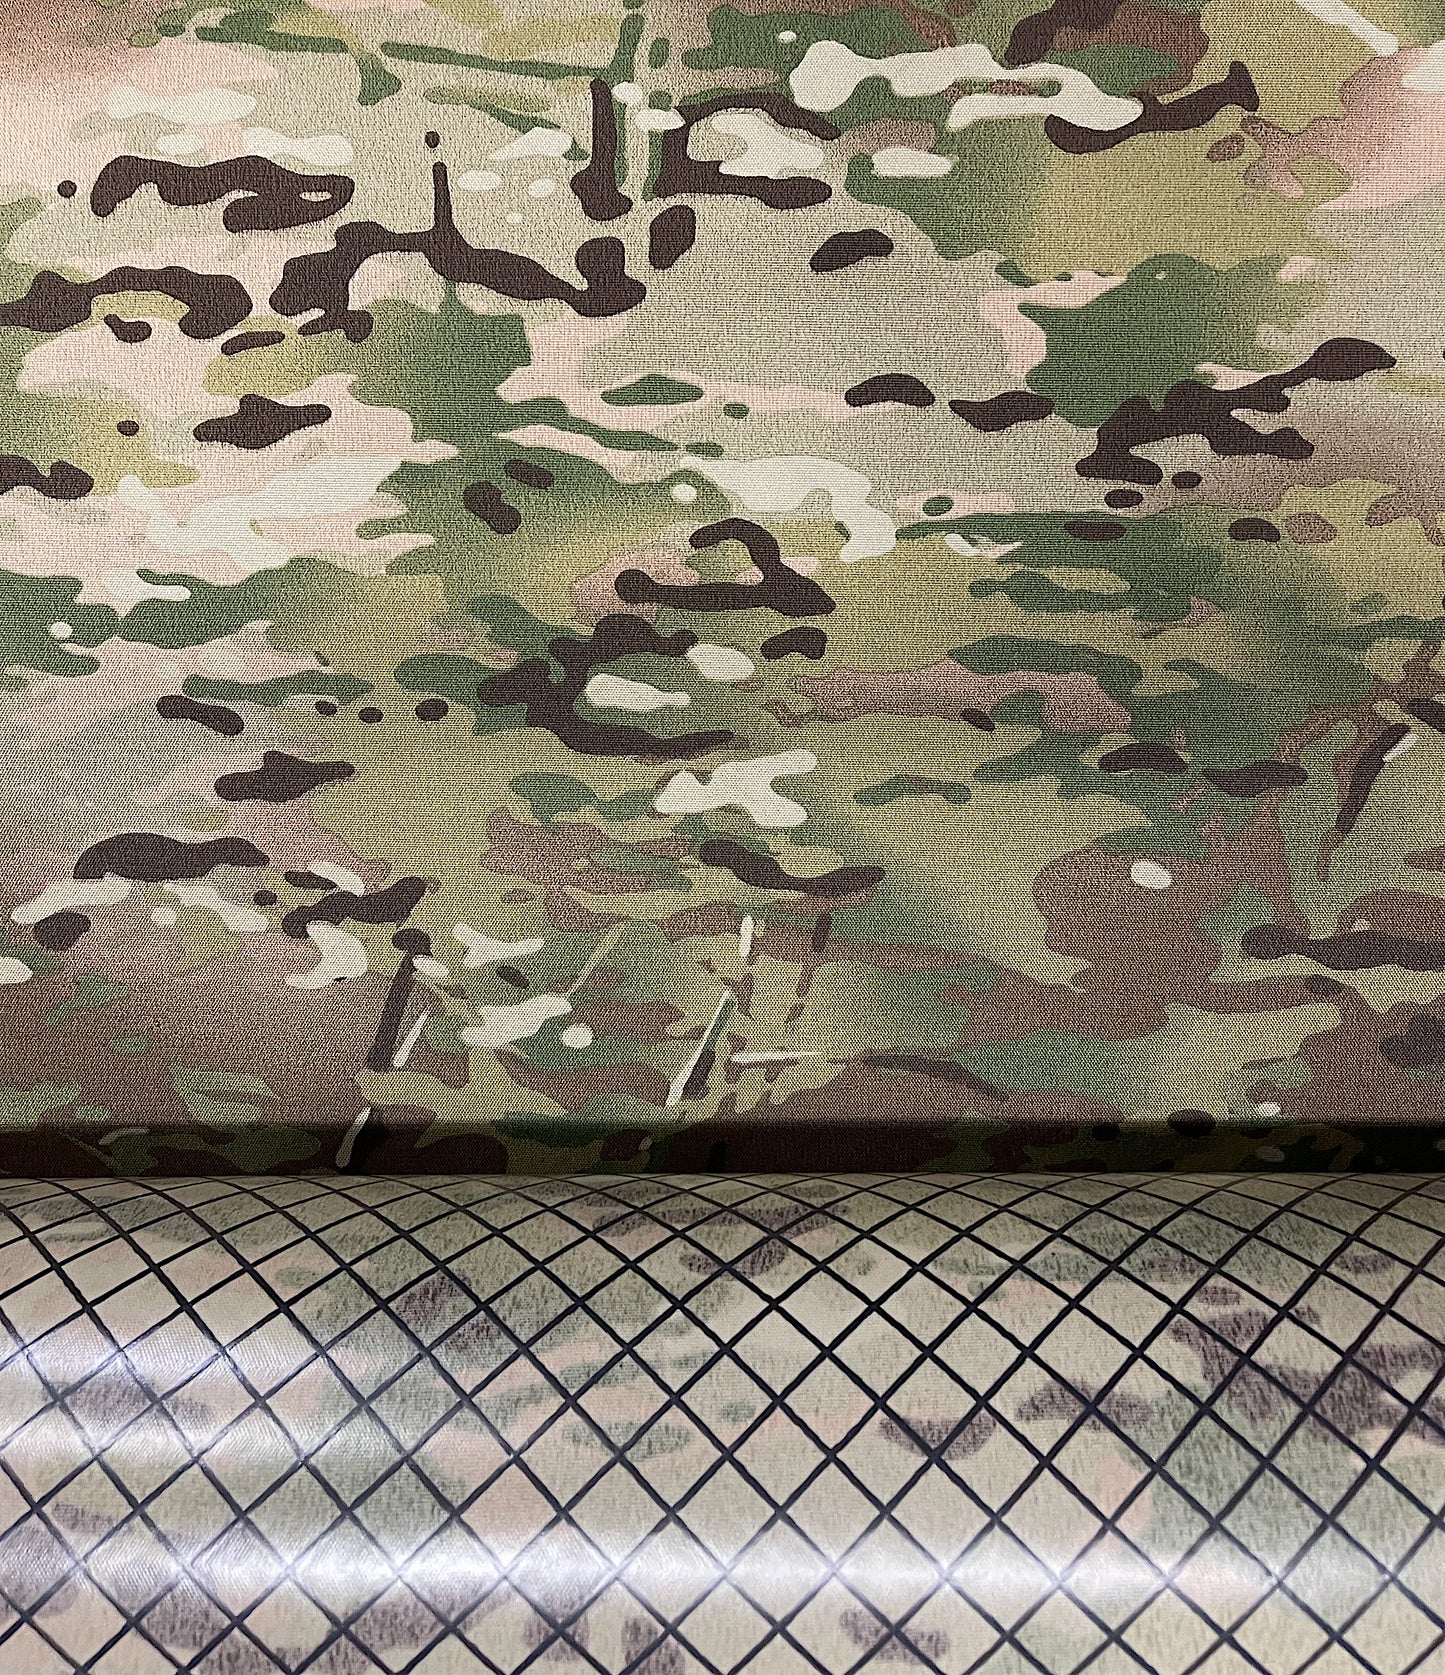 ECOPAK by Challenge - 600D Polyester Fabric w/ 0.5 mil Recycled Film Backing - MultiCam® (Sold per Yard)